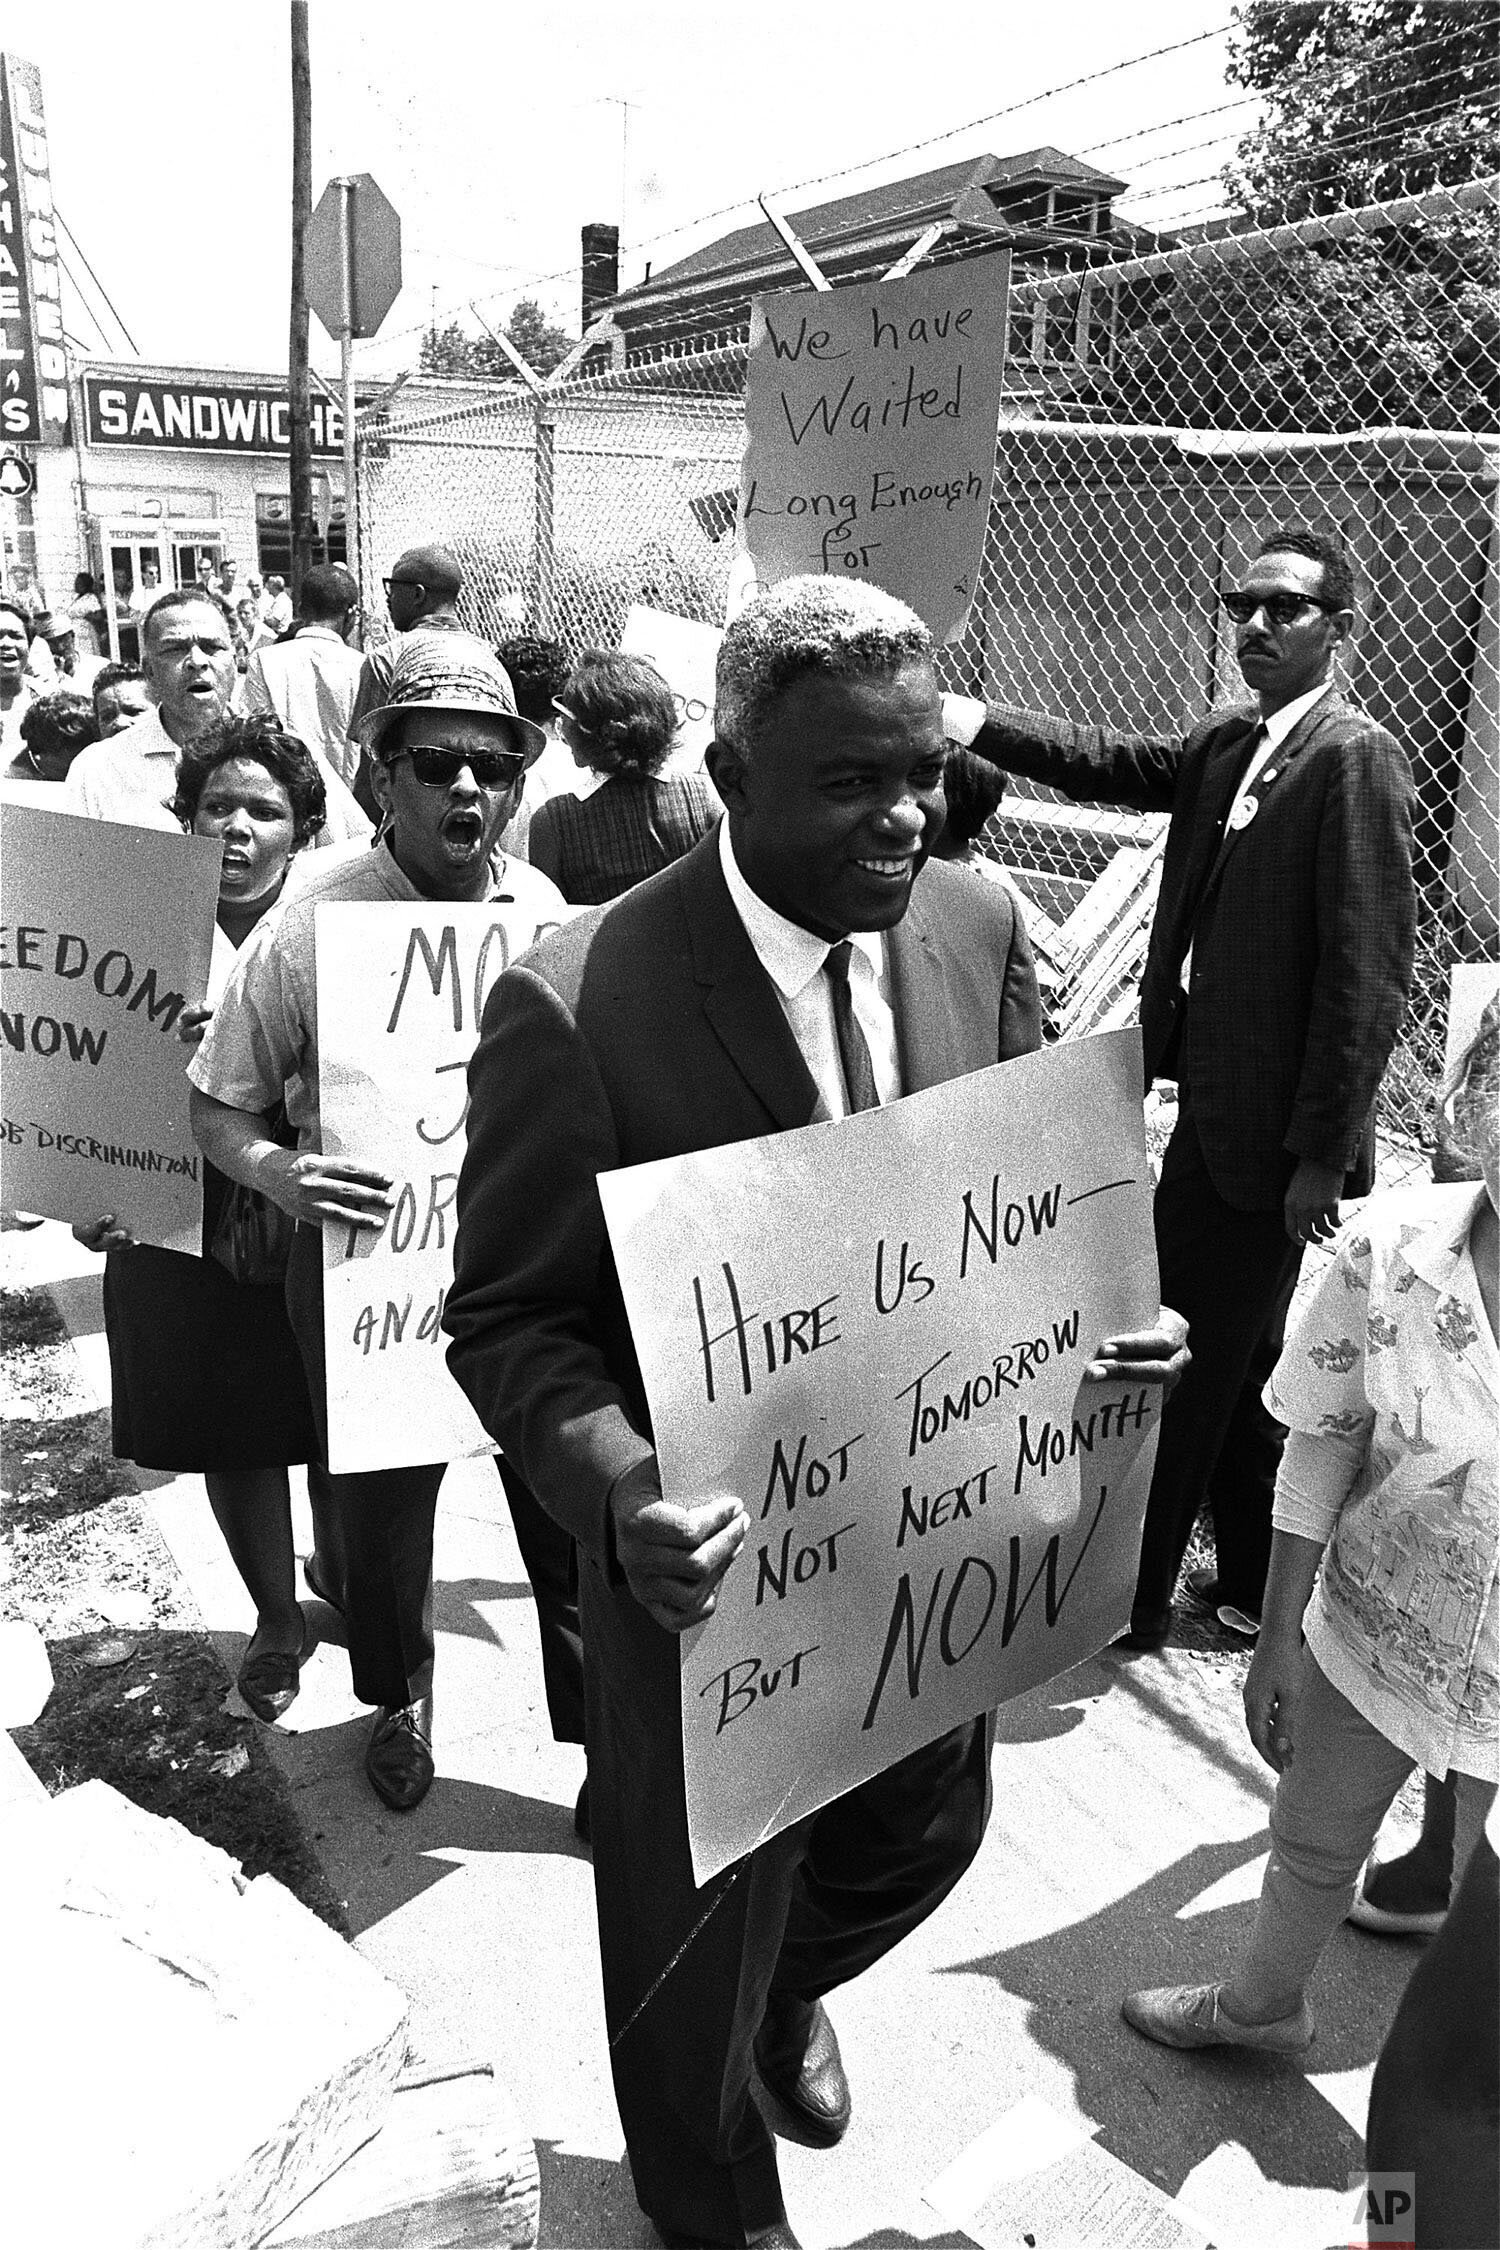  Former baseball star Jackie Robinson carries a placard as he joins pickets at the construction site of the Down State Medical Center in Brooklyn, New York City, August 2, 1963.  Robinson and members of CORE, the Congress of Racial Equality, have bee